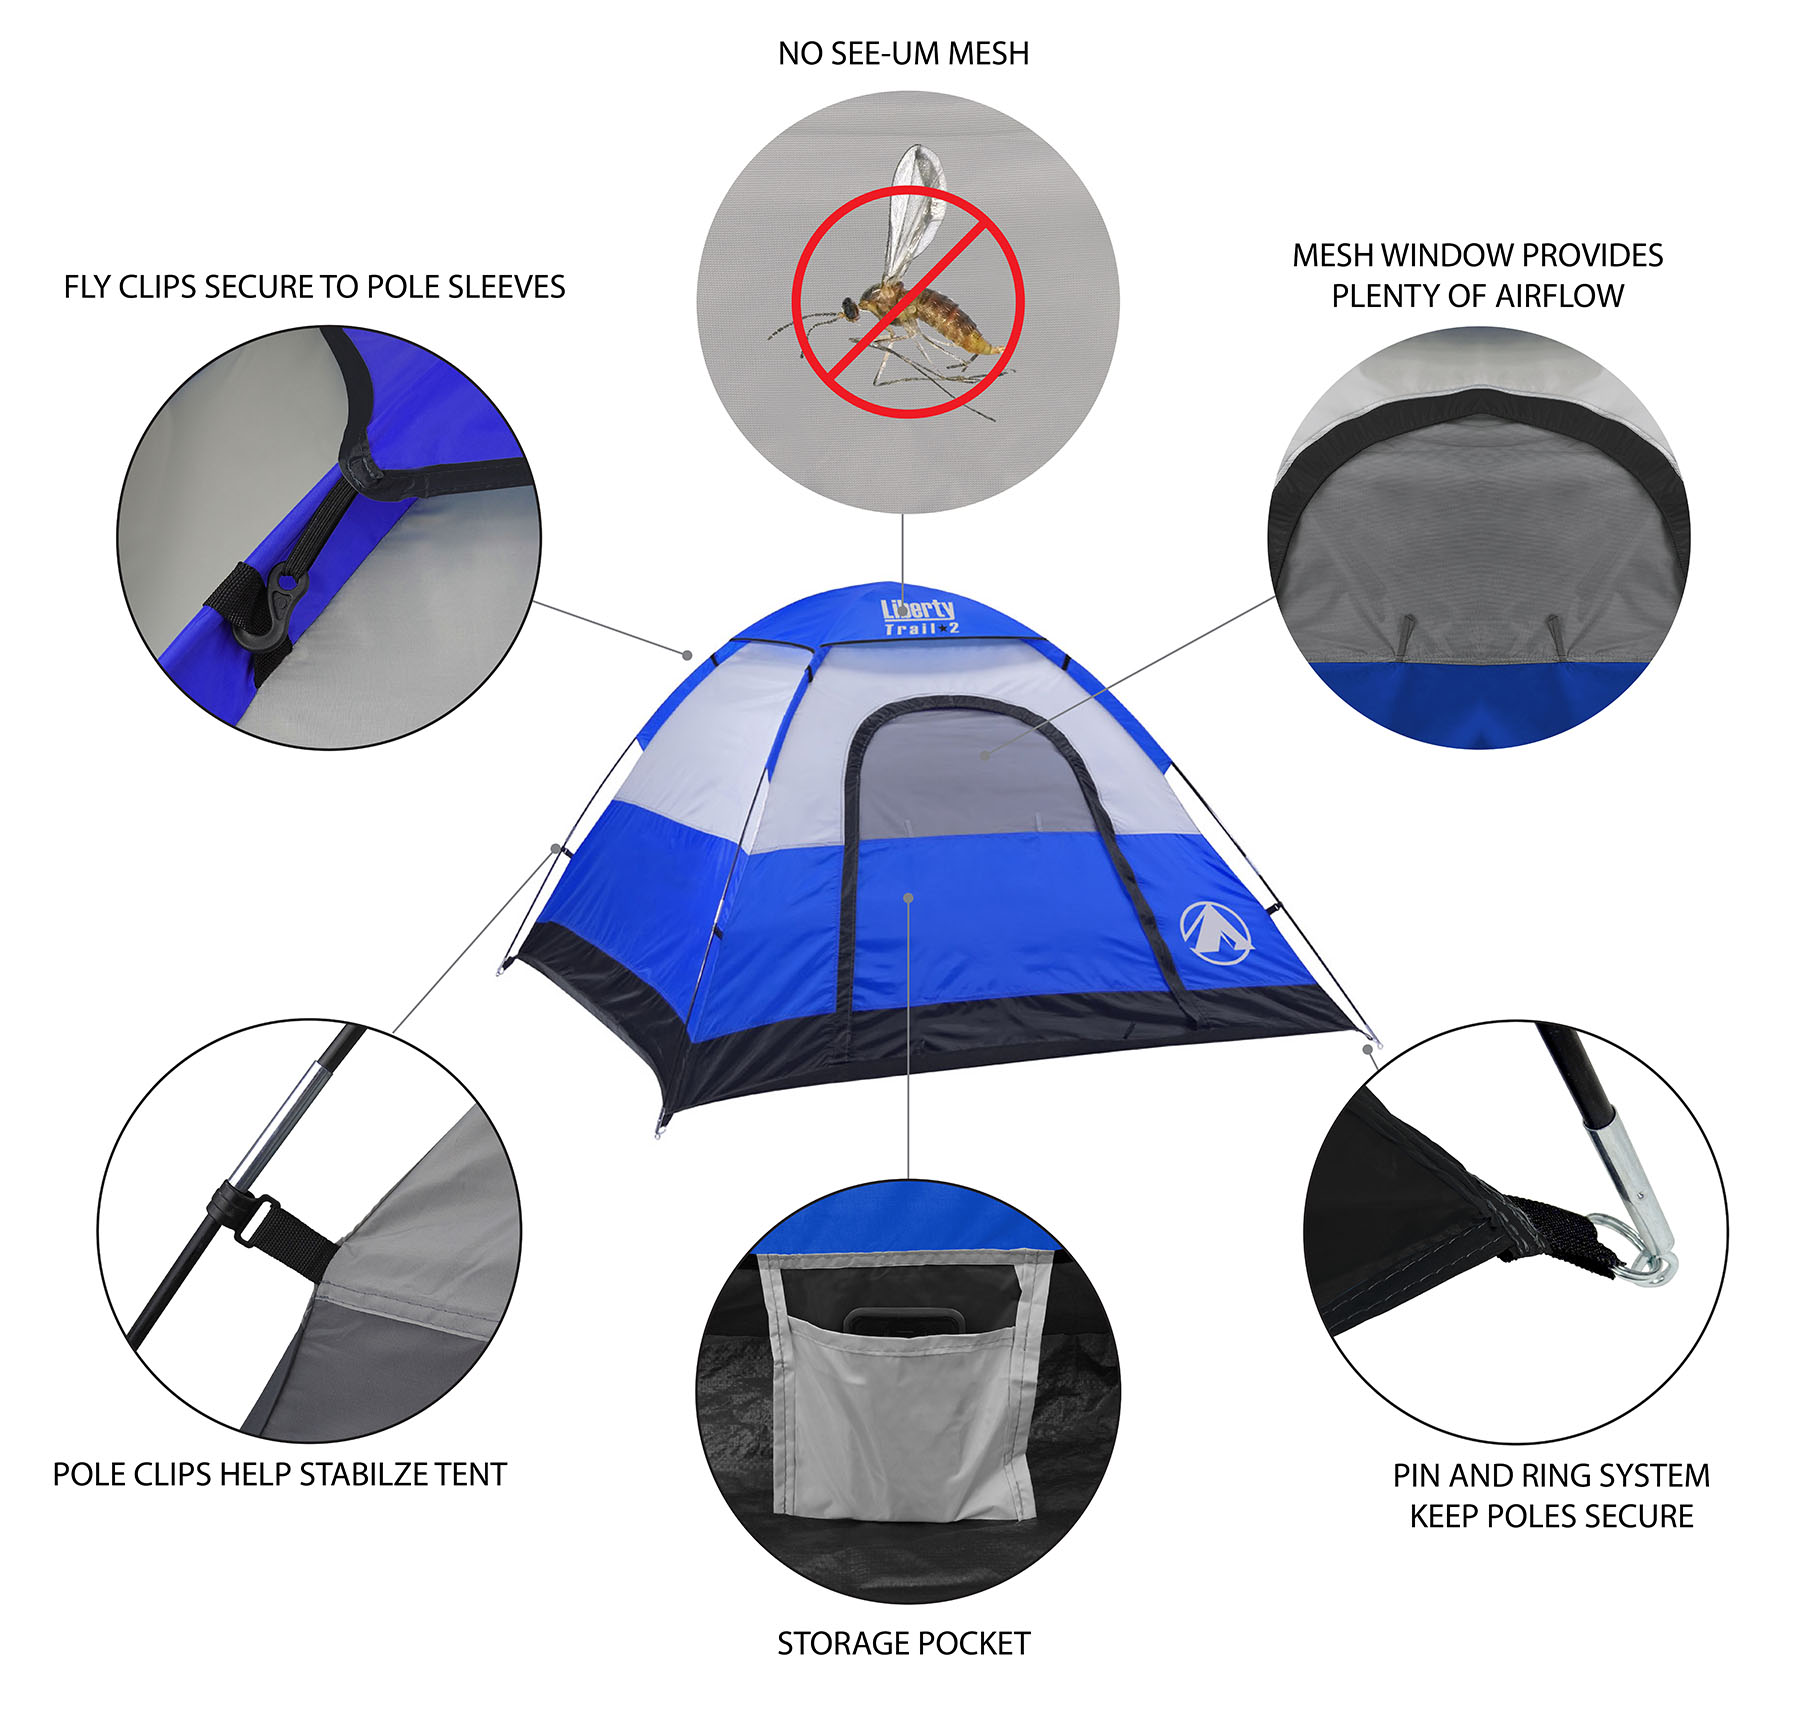 GIGATENT 7 X 7 3 PERSON 3 SEASON Dome TENT waterproof UV resistant - image 4 of 11